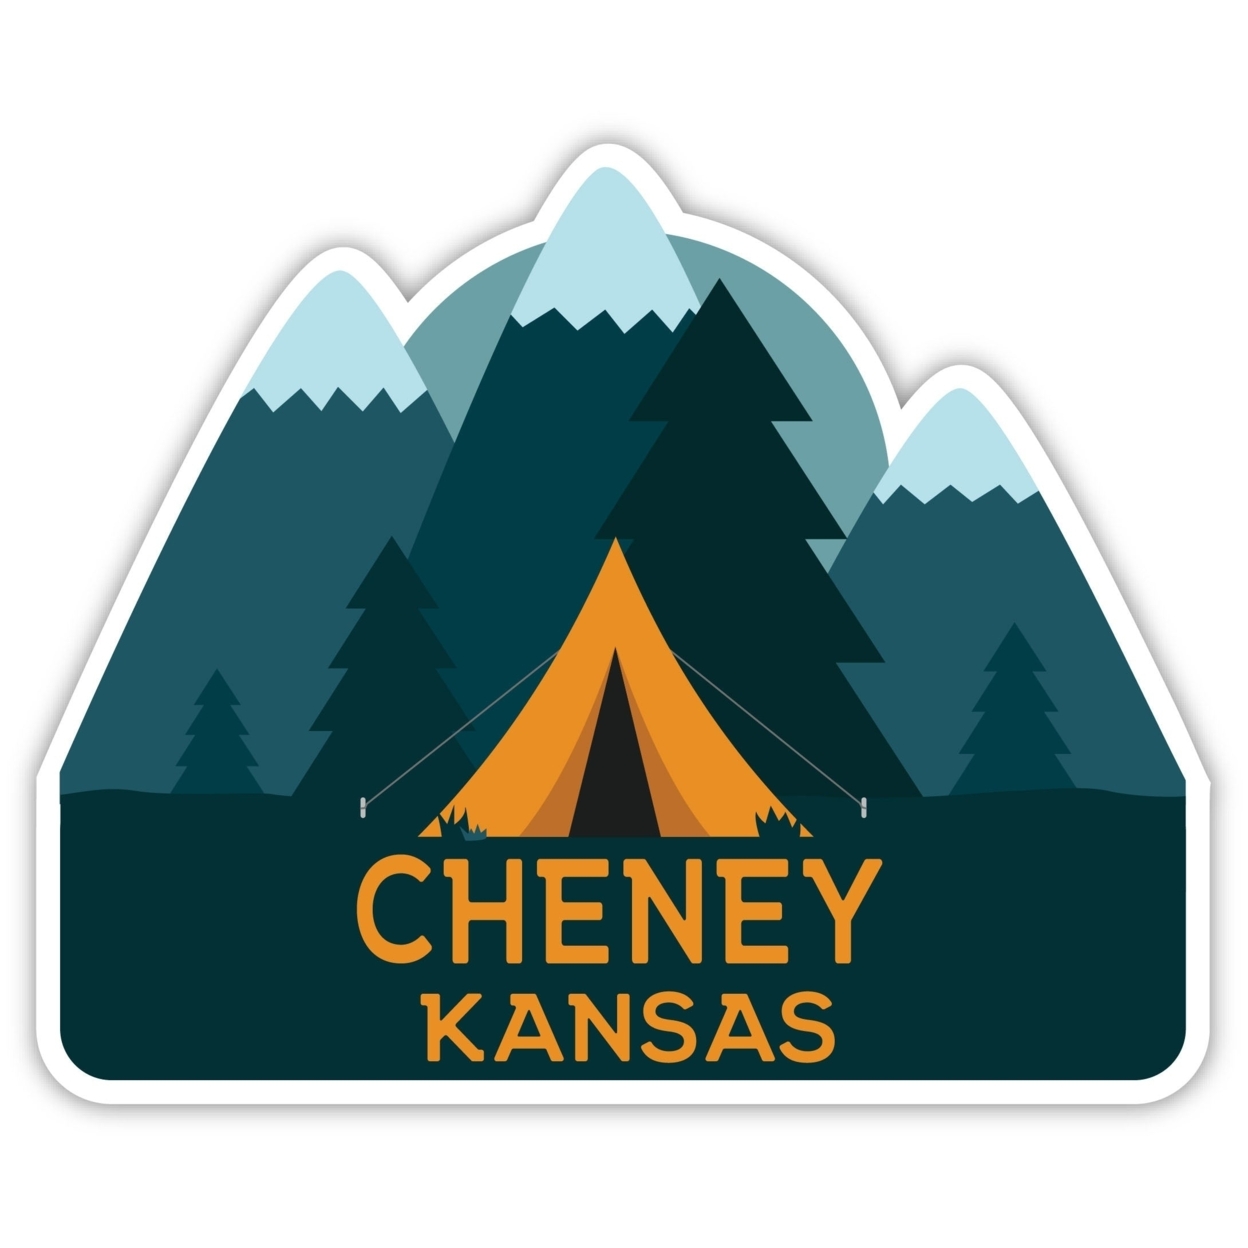 Cheney Kansas Souvenir Decorative Stickers (Choose Theme And Size) - 4-Pack, 4-Inch, Tent